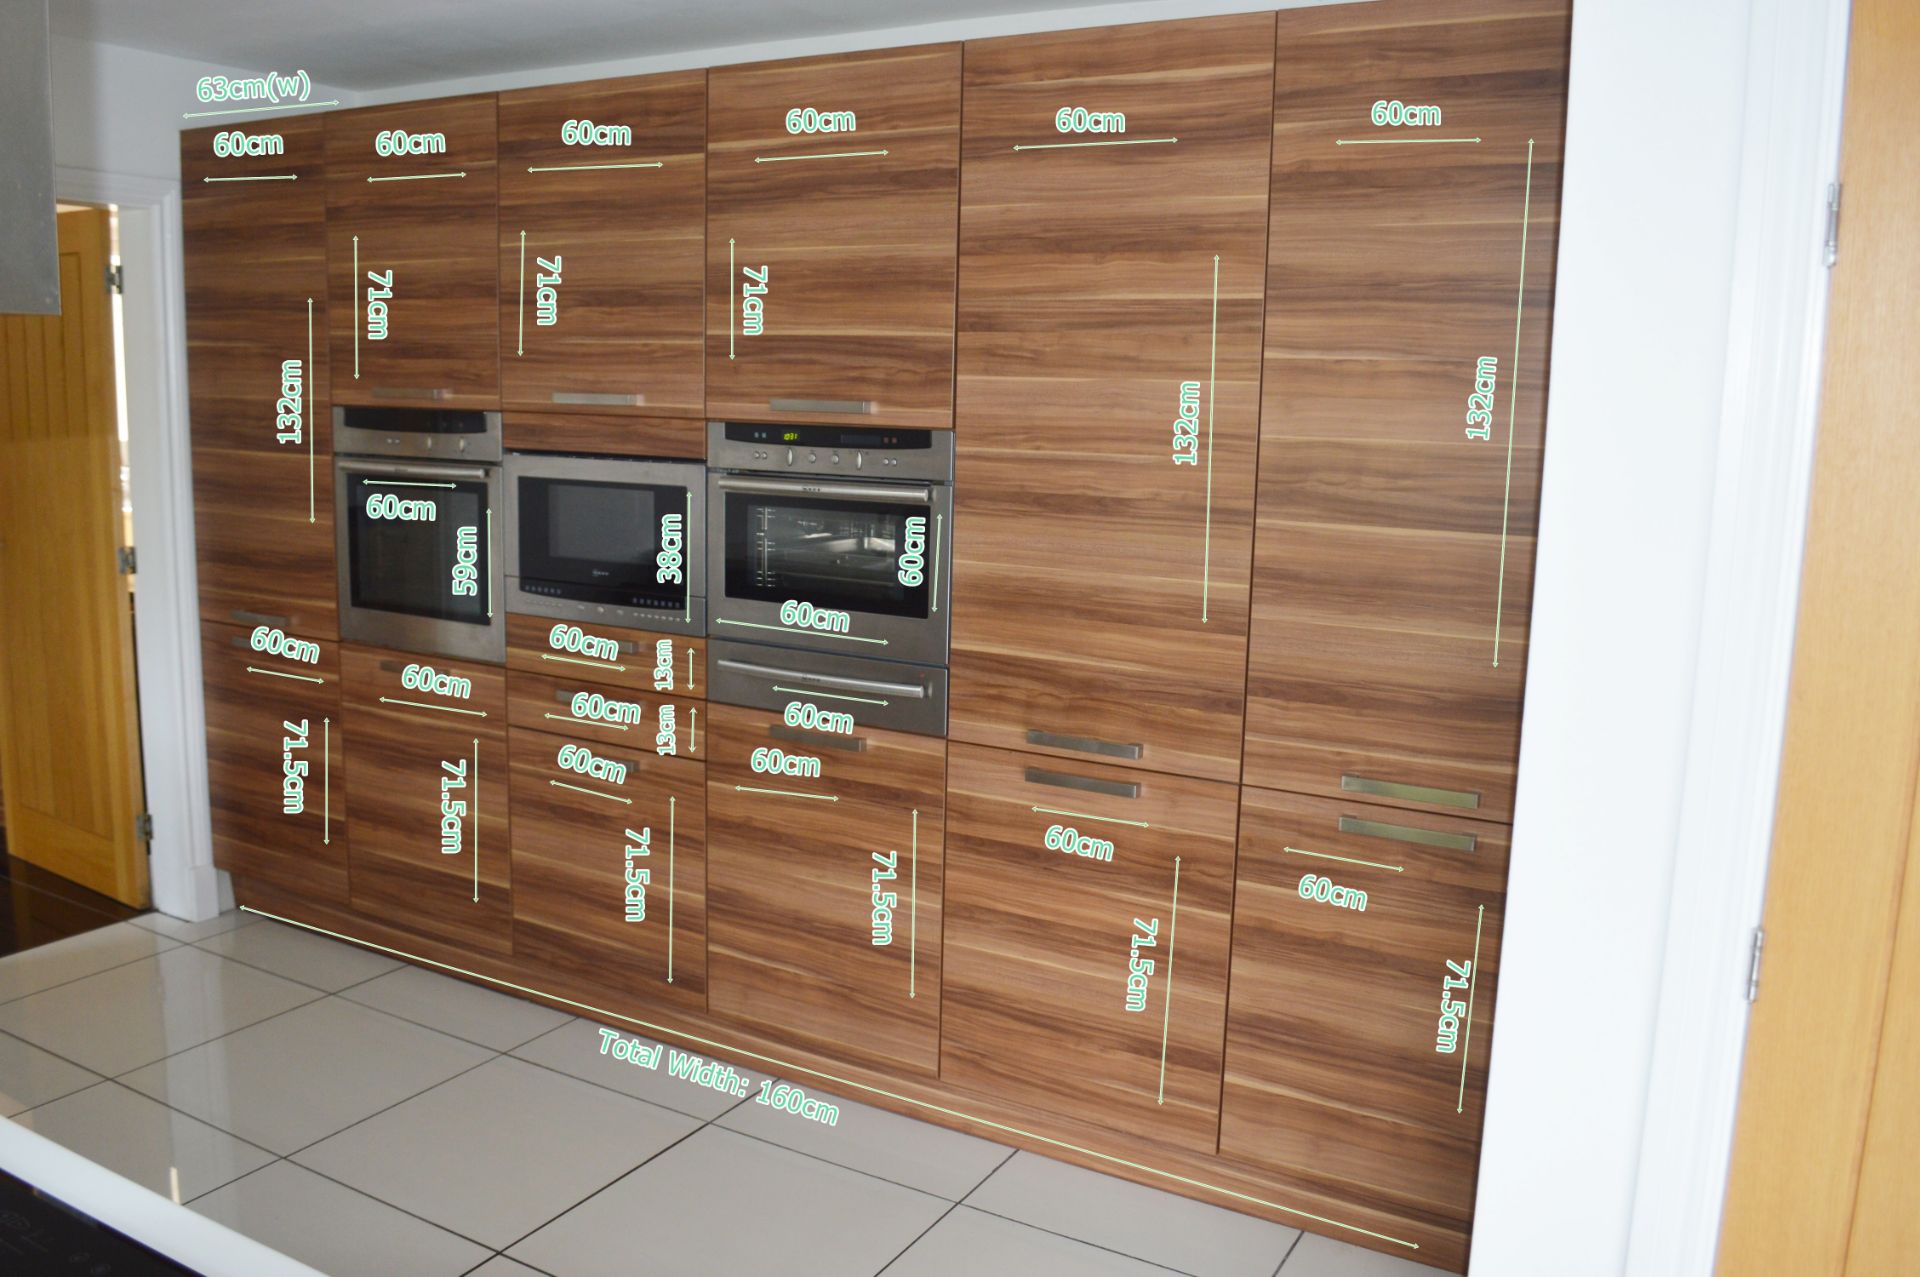 1 x Contemporary Bespoke Fitted Kitchen With Neff Branded Appliances - Collection Date: 1st November - Image 18 of 52